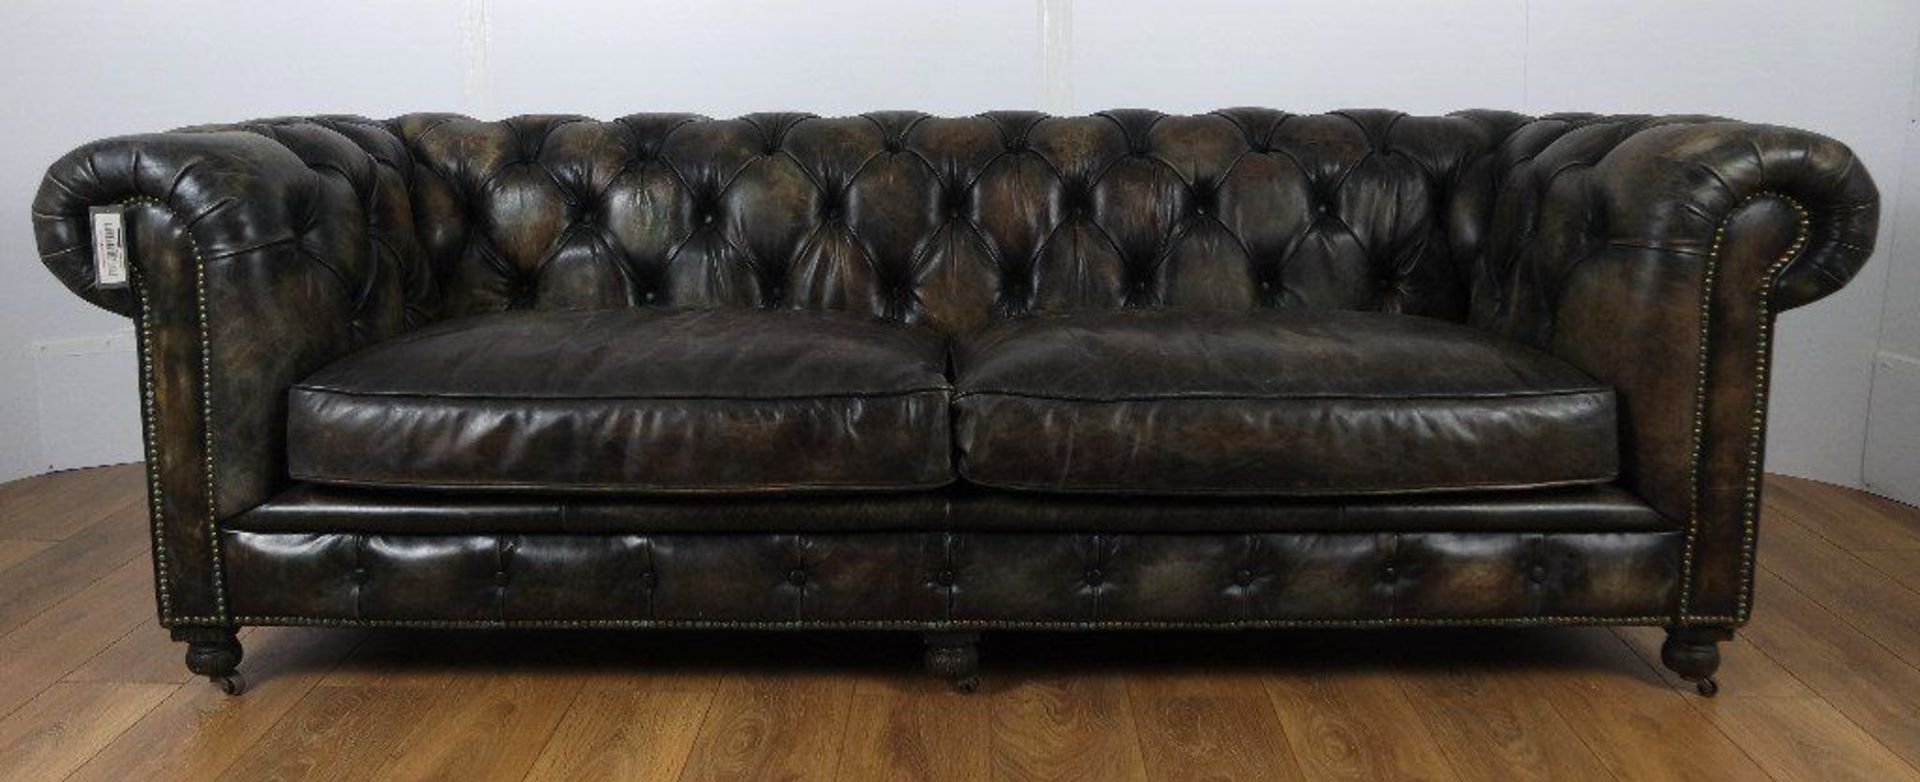 Kensington Sofa 3 Seater Sioux Nut Leather The Kensington Collection Is A Modern Take On The Classic